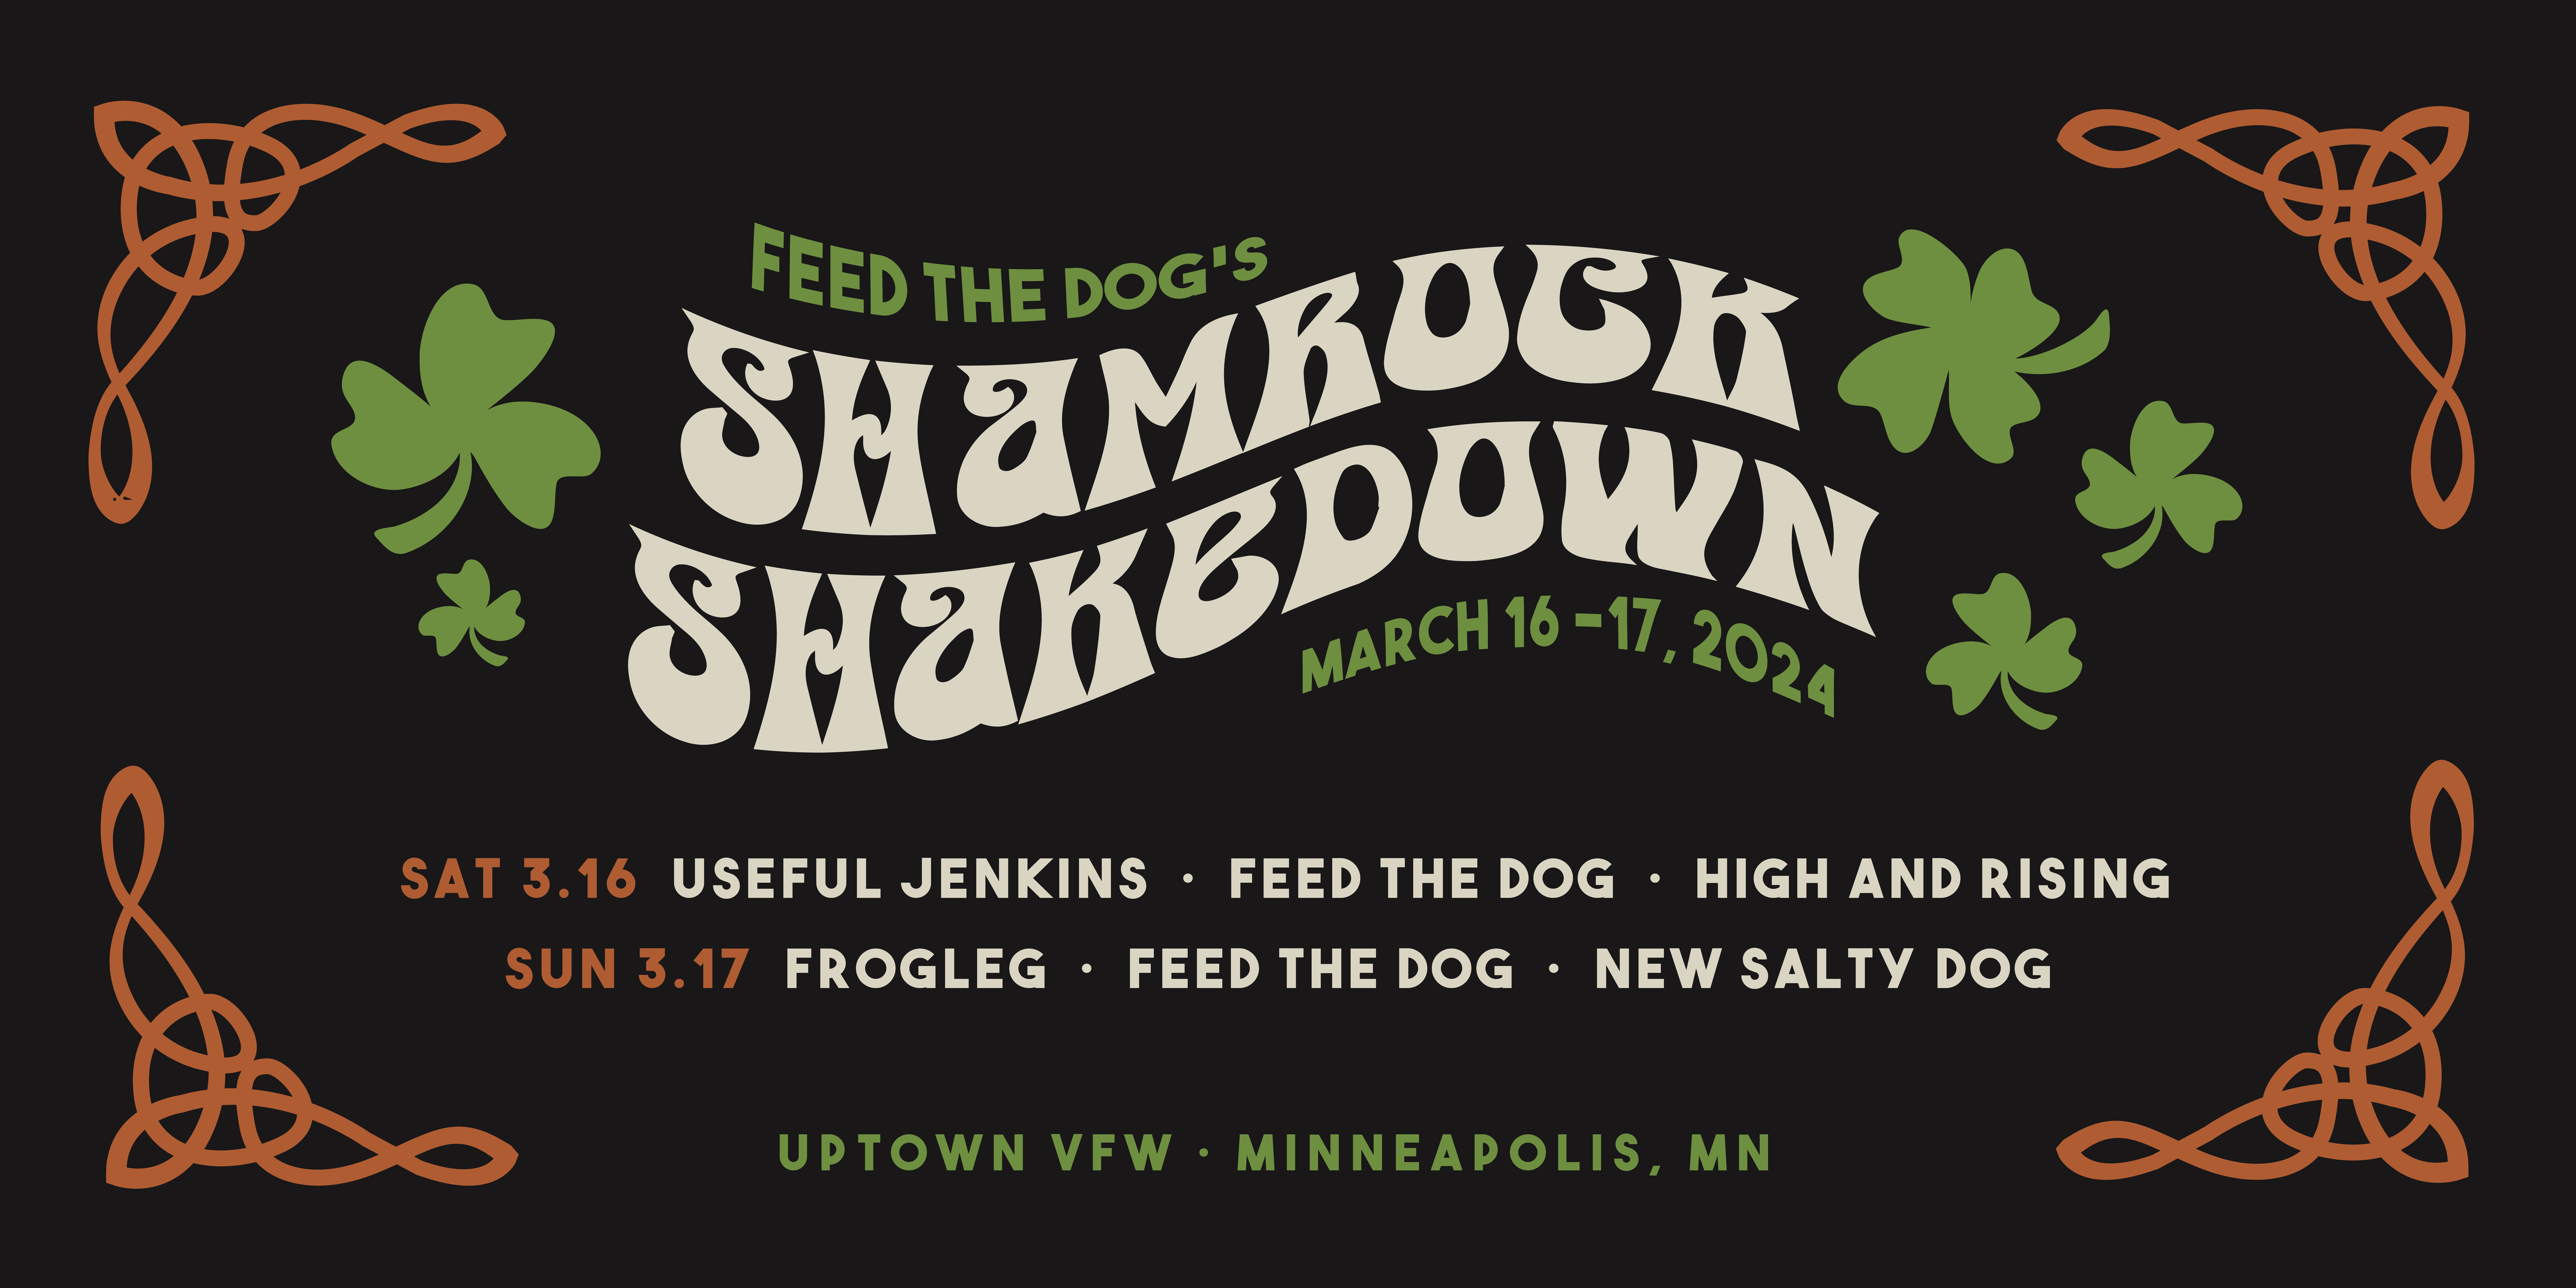 Feed the Dog's Shamrock Shakedown Useful Jenkins | Frogleg | Feed the Dog | High & Rising | New Salty Dog Saturday, March 16 | Sunday March 17 James Ballentine "Uptown" VFW Post 246 Both Shows: Doors 7:30pm :: Music 8:00pm :: 21+ 2-Day Early-Bird: $30 (Avail Until 1/17/24 or Until Gone) 2-Day Advance: $40 (Limited & Only Available Online) 1-Day Saturday: $20 ADV / $25 DOS 1-Day Sunday: $20 ADV / $25 DOS